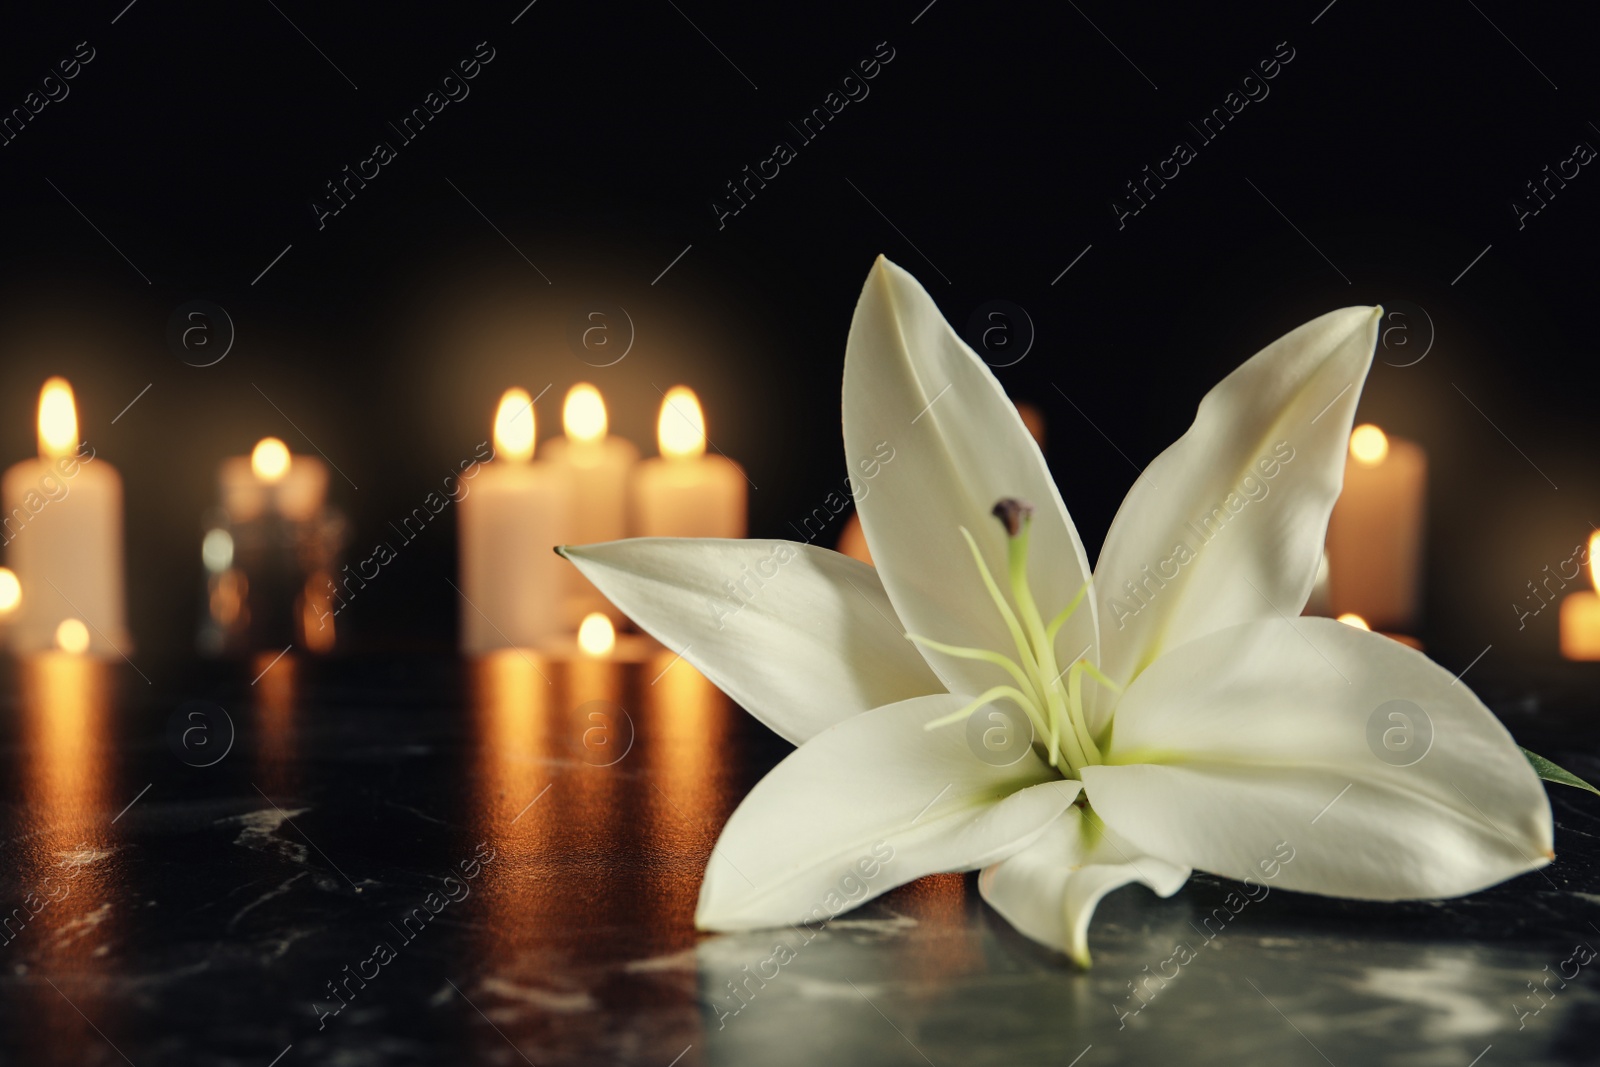 Photo of White lily and blurred burning candles on table in darkness, space for text. Funeral symbol